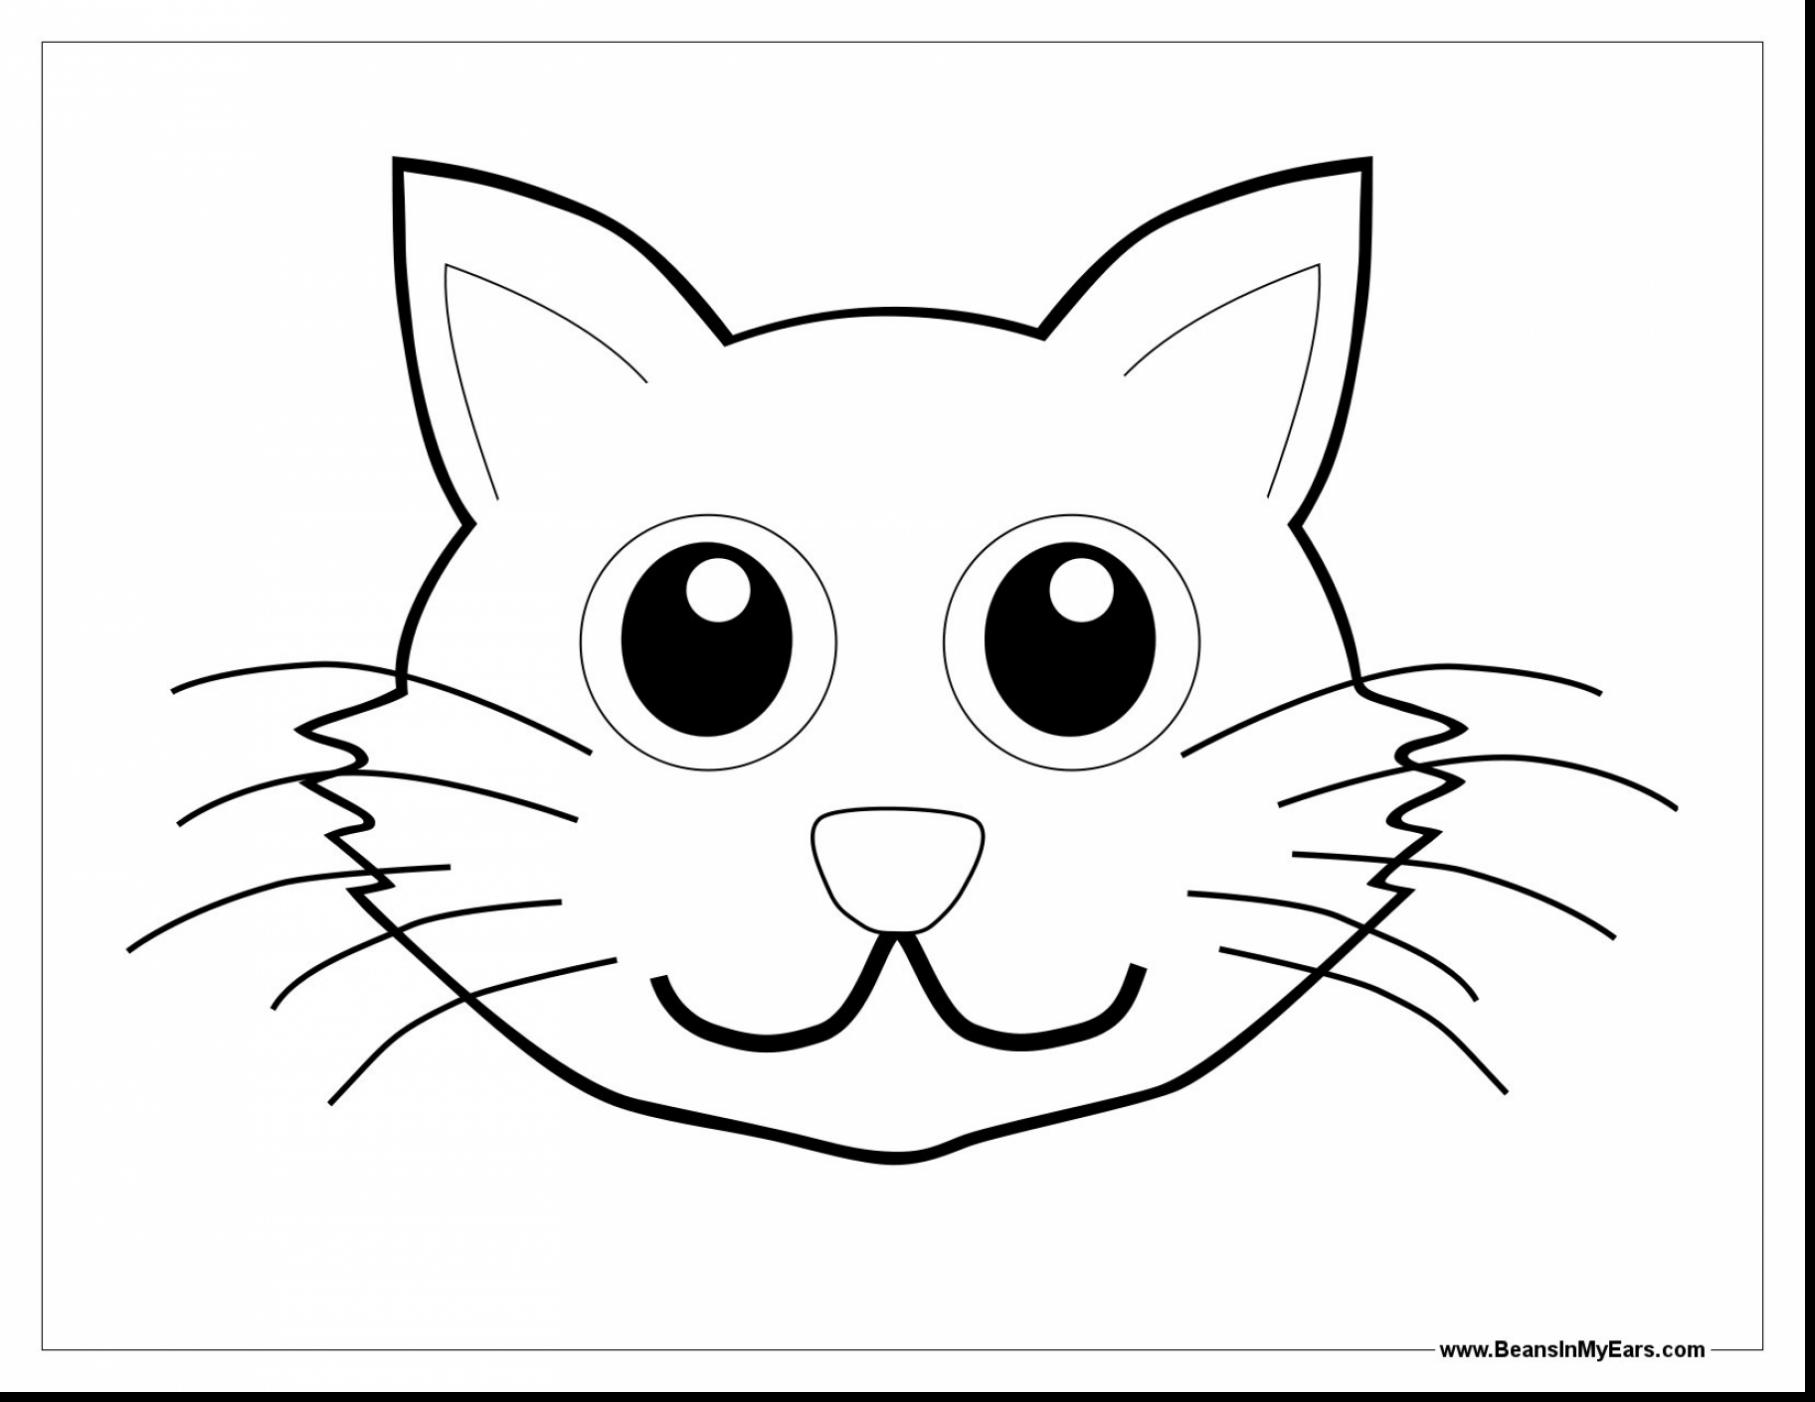 Fluffy Cat Coloring Pages at Free printable